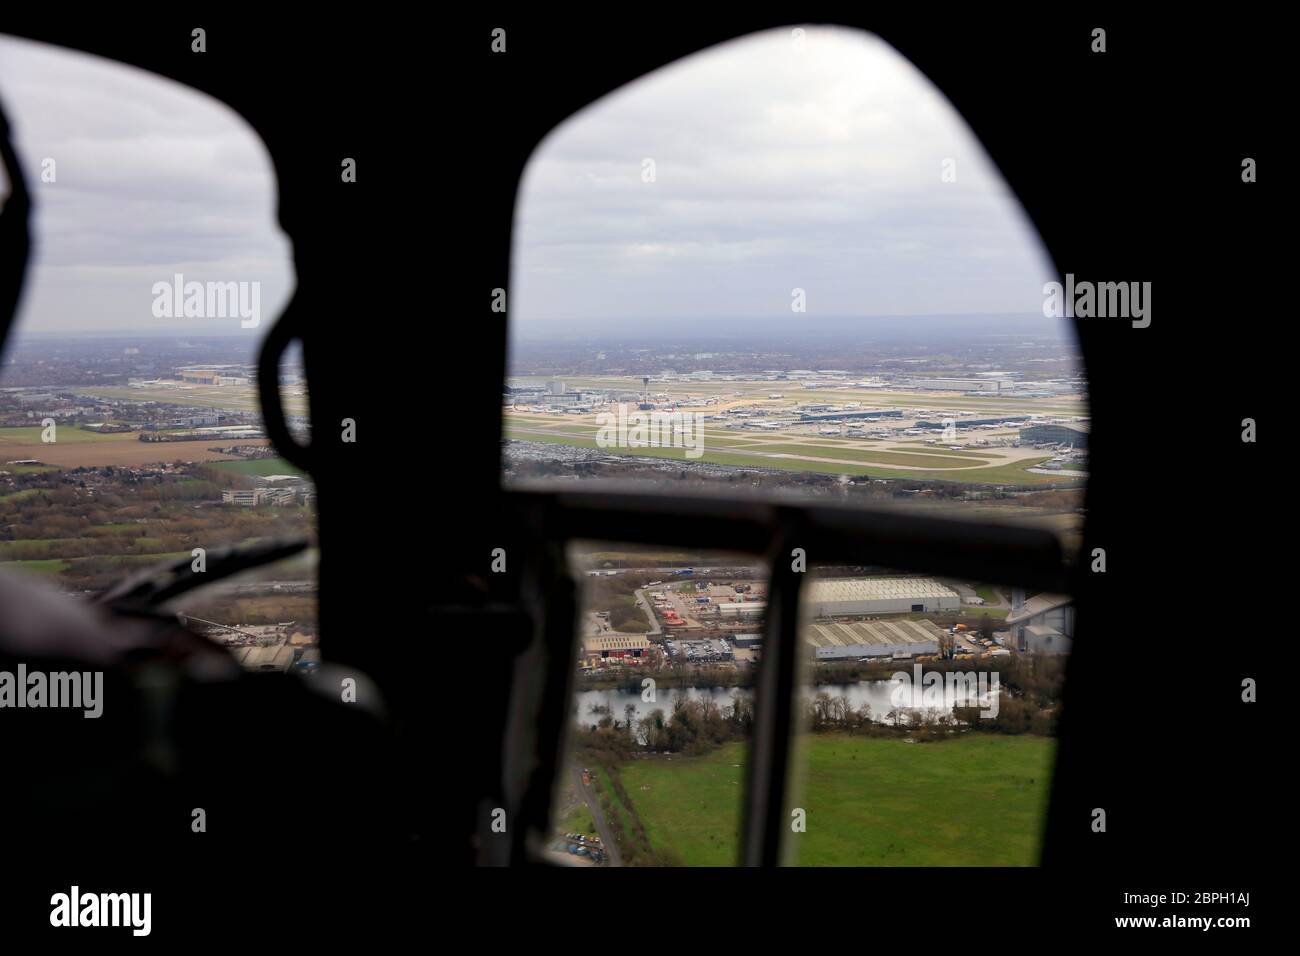 View inside helicopter looking towards Heathrow Airport Stock Photo